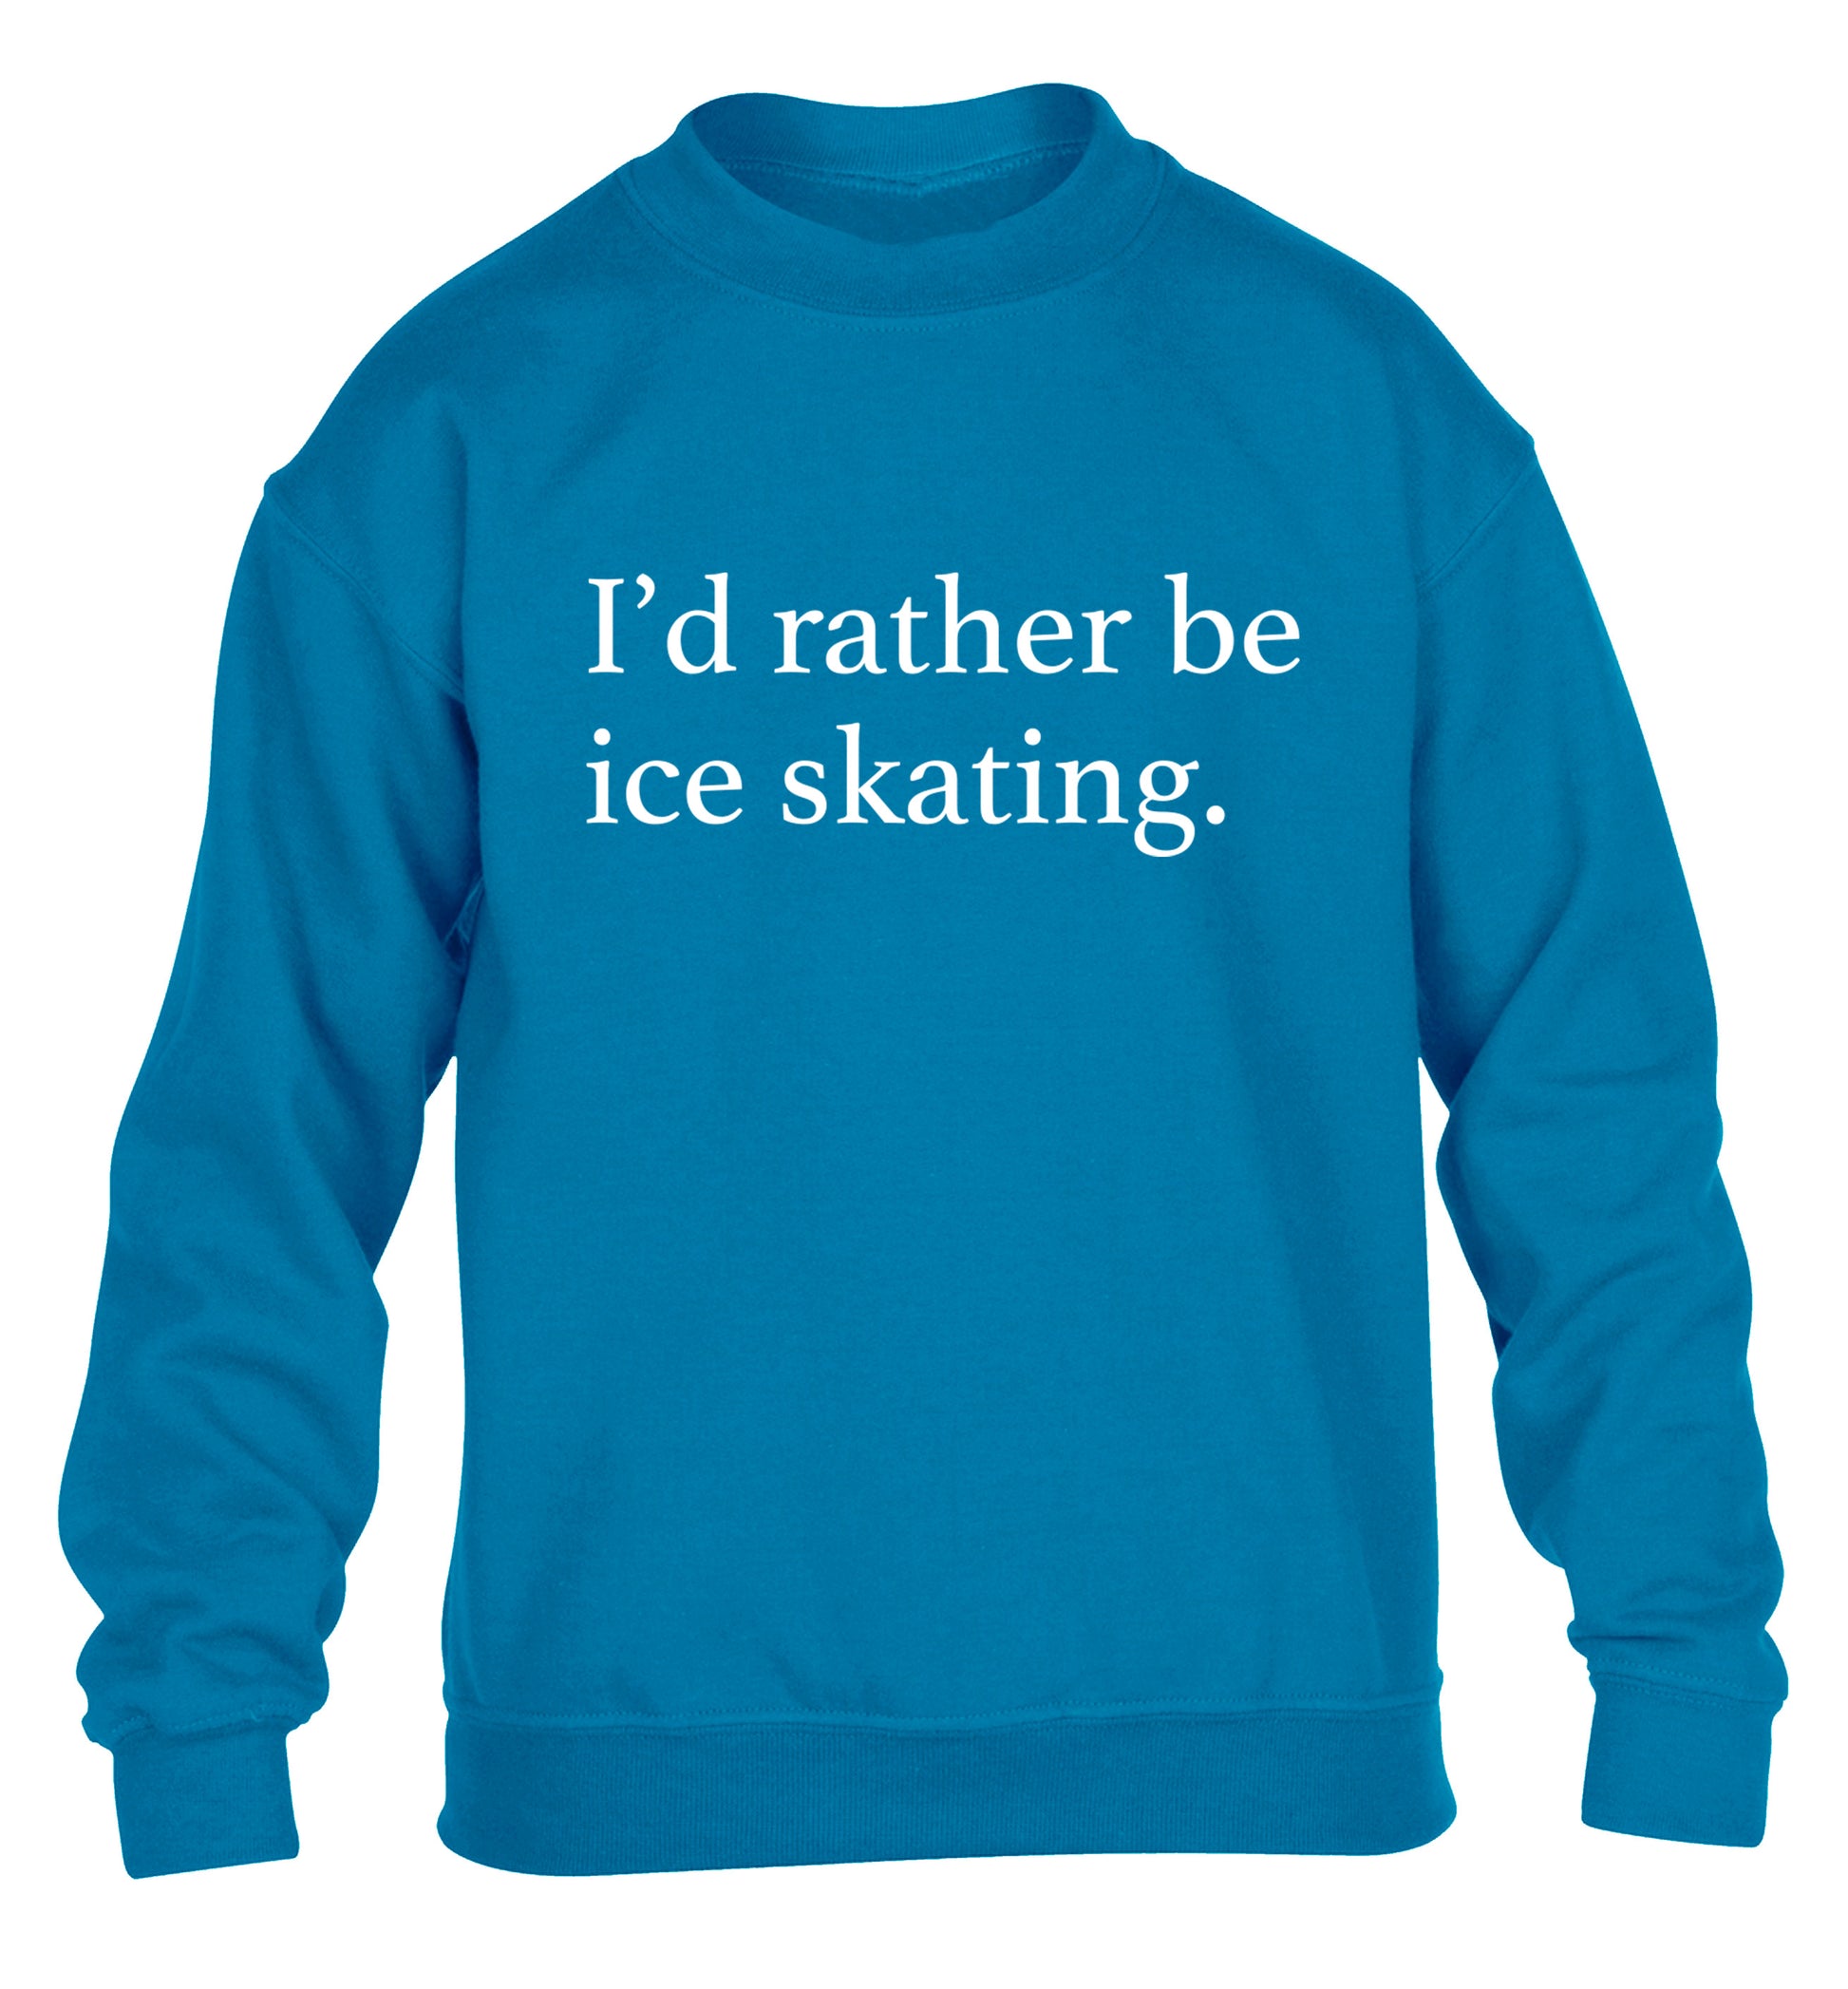 I'd rather be ice skating children's blue sweater 12-14 Years